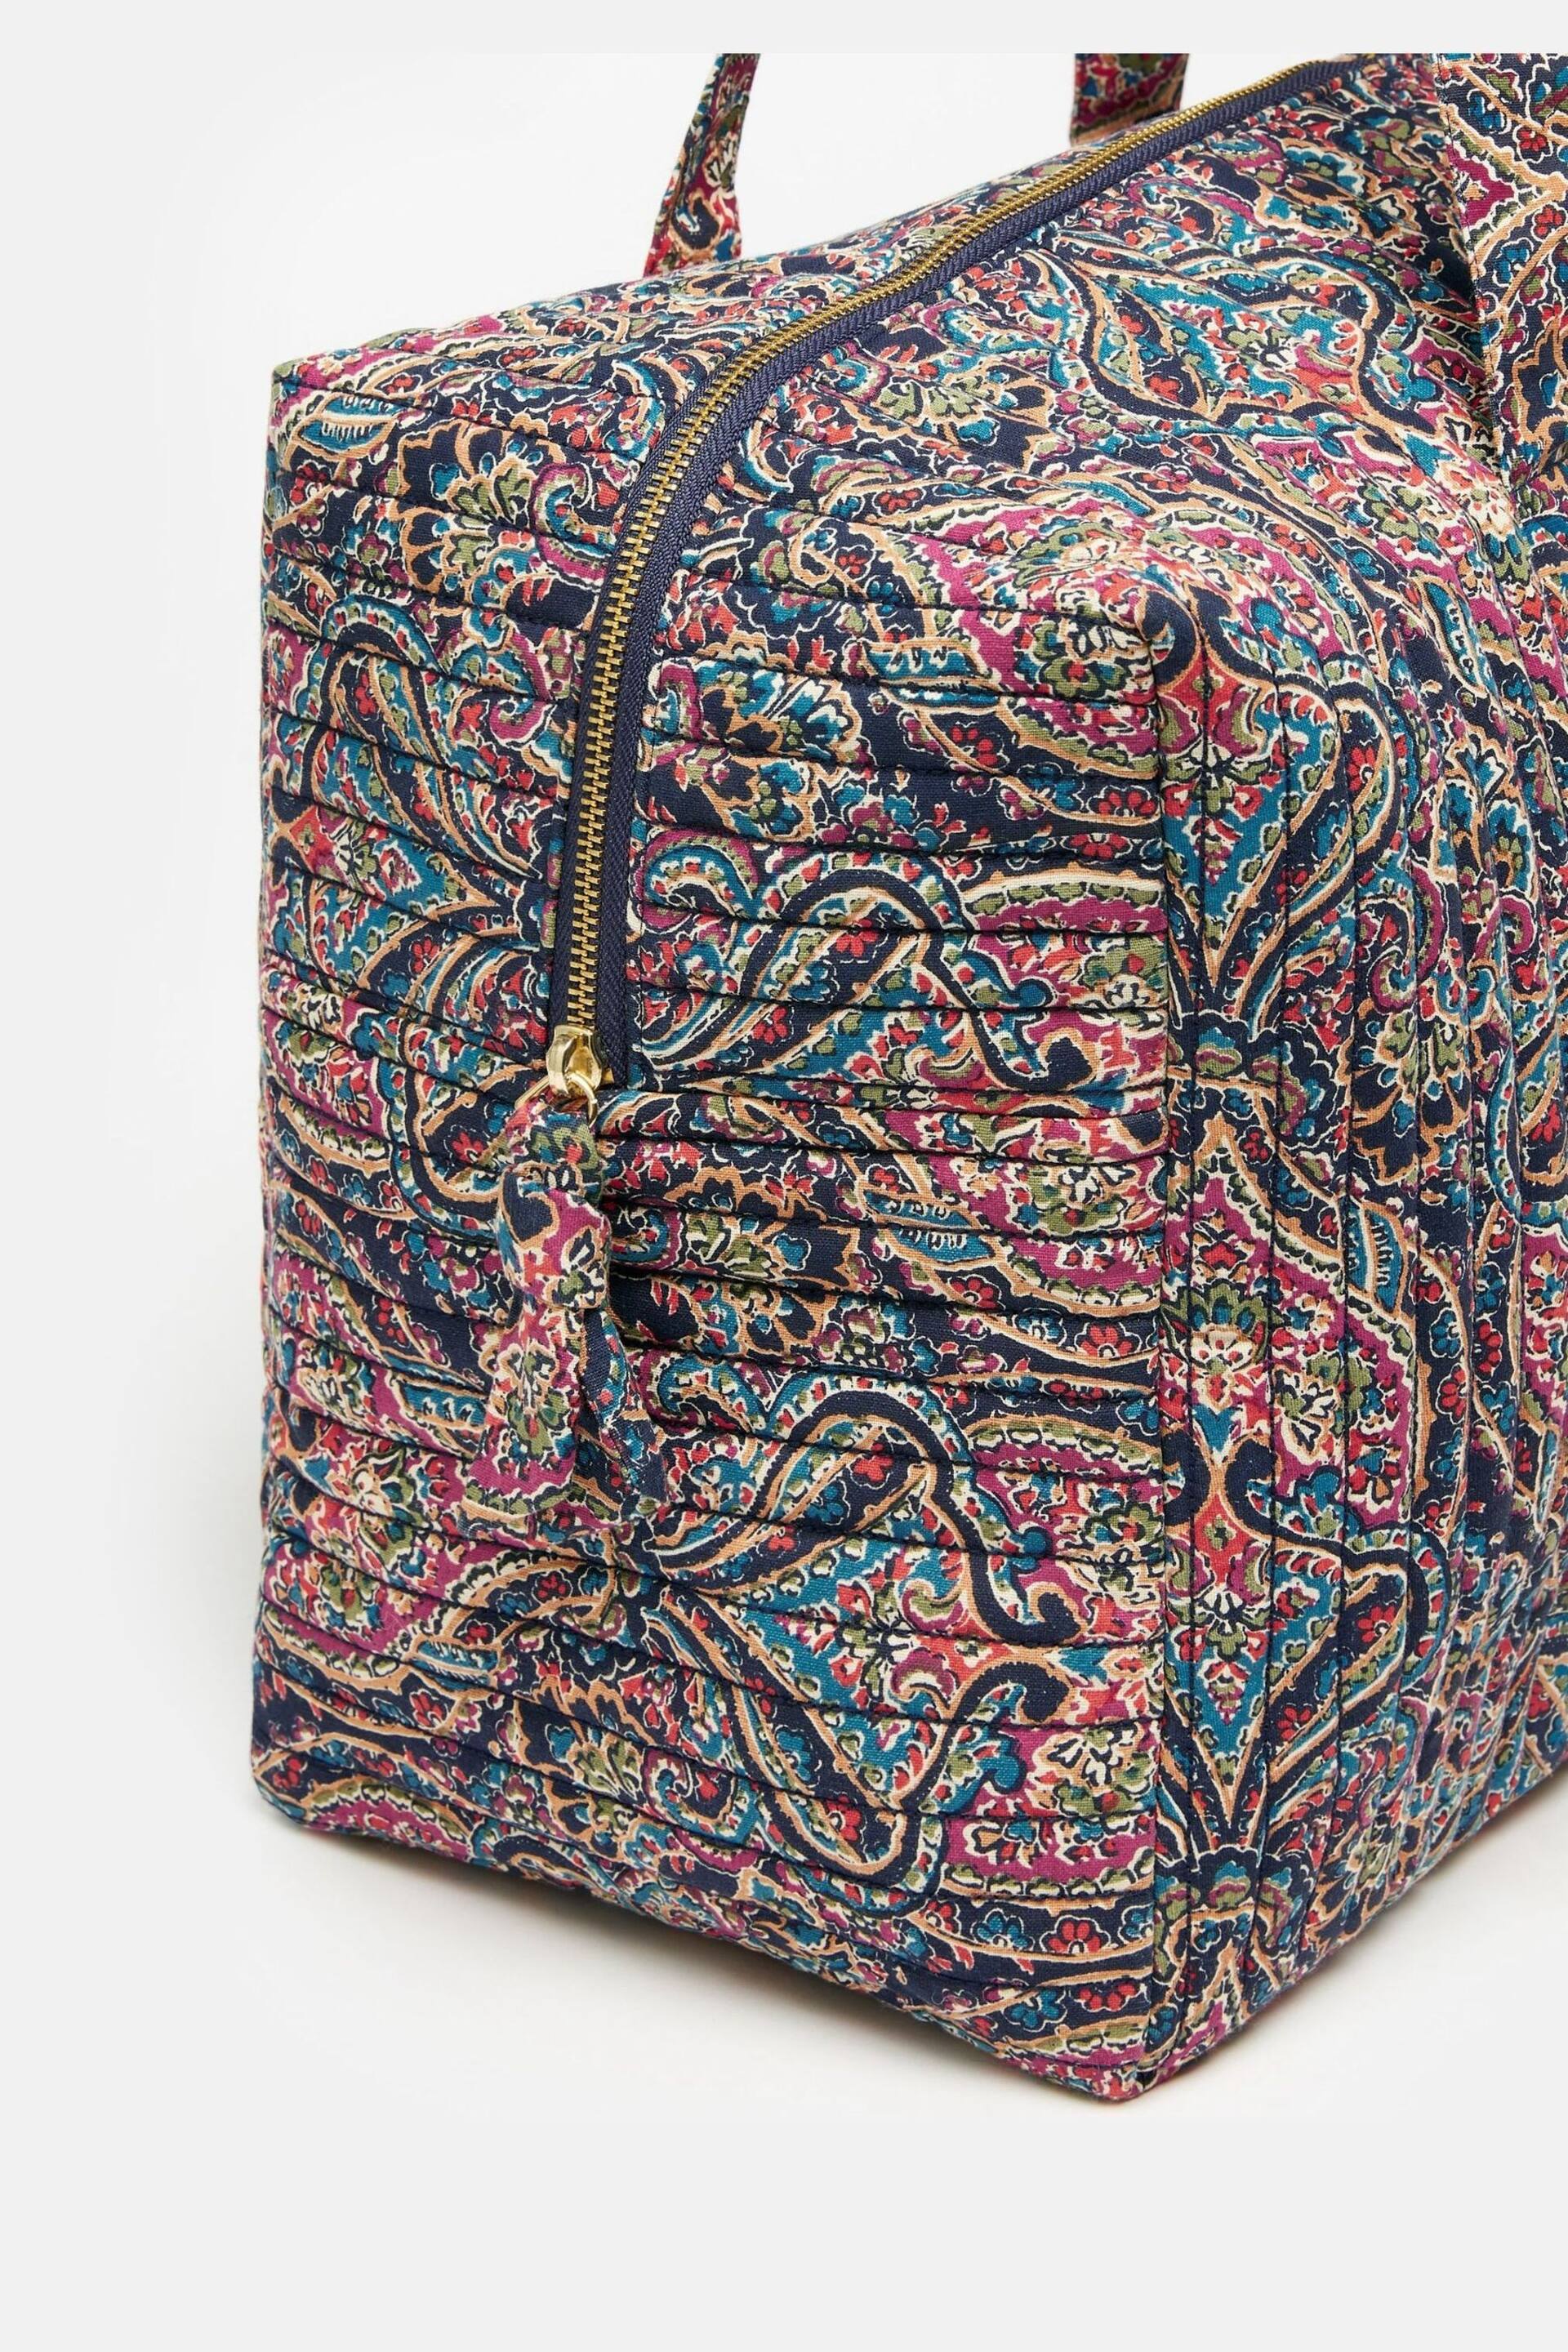 Joules Dolly Paisley Print Weekend Bag - Image 8 of 8